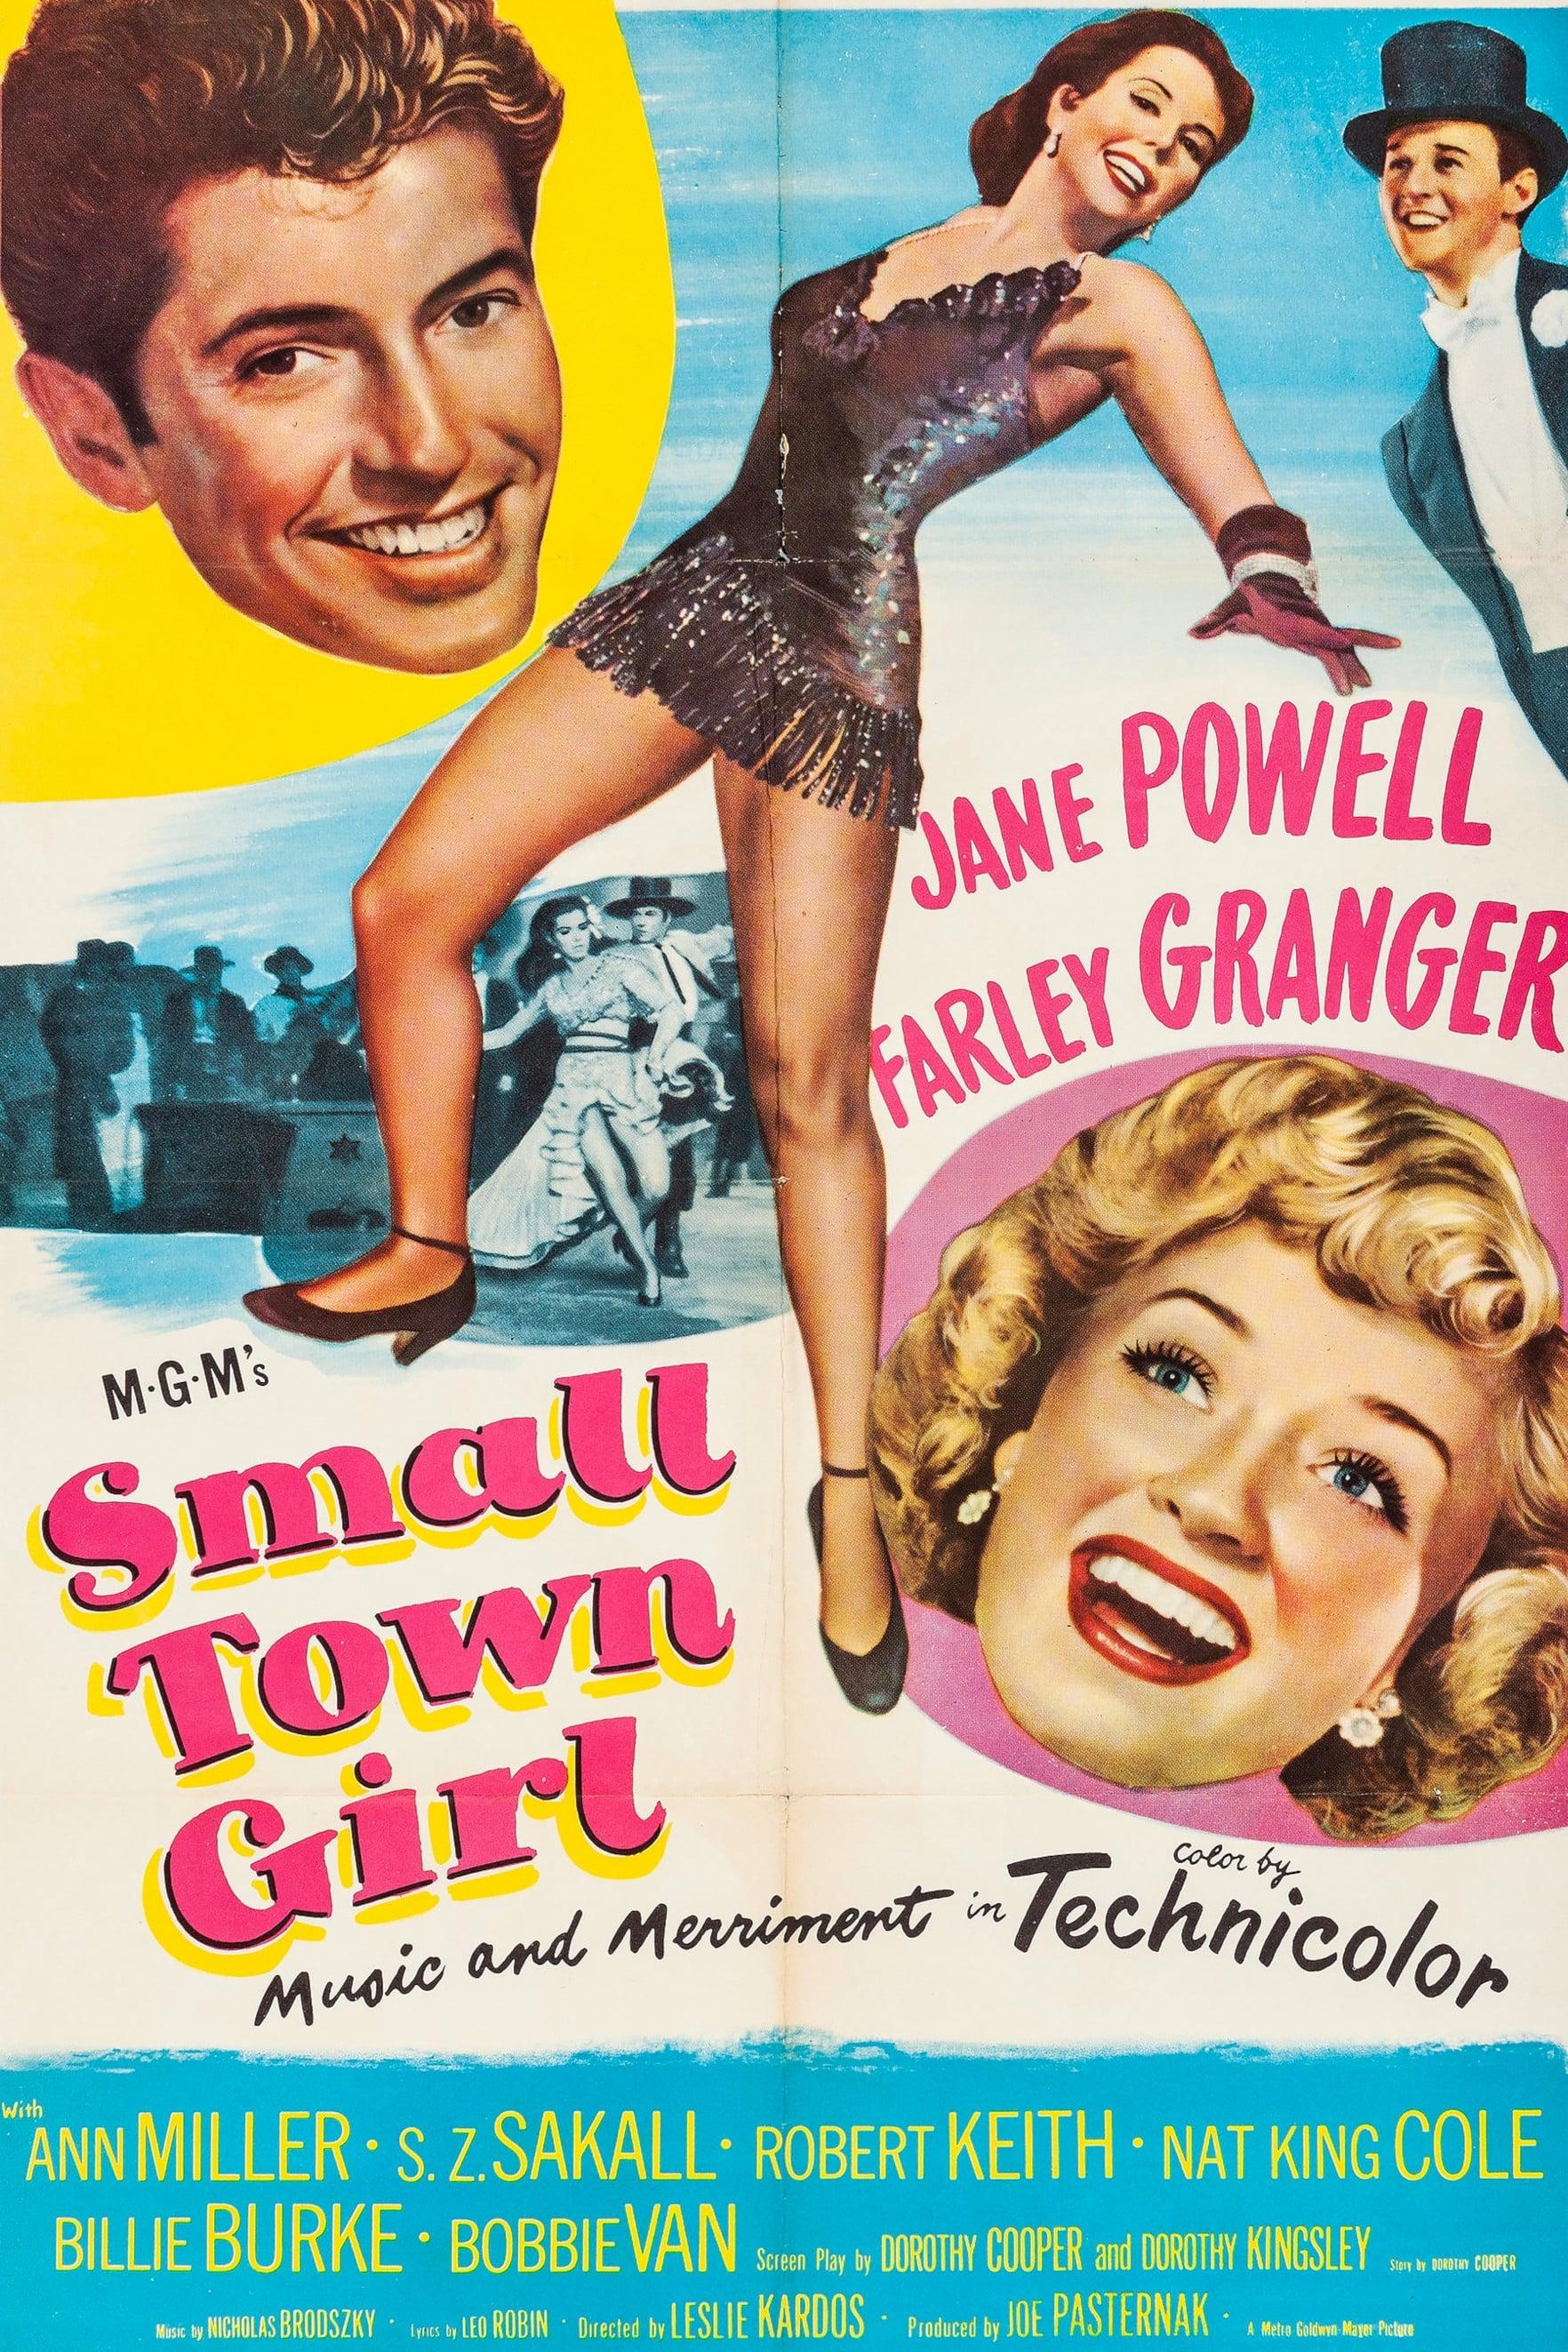 Small Town Girl poster